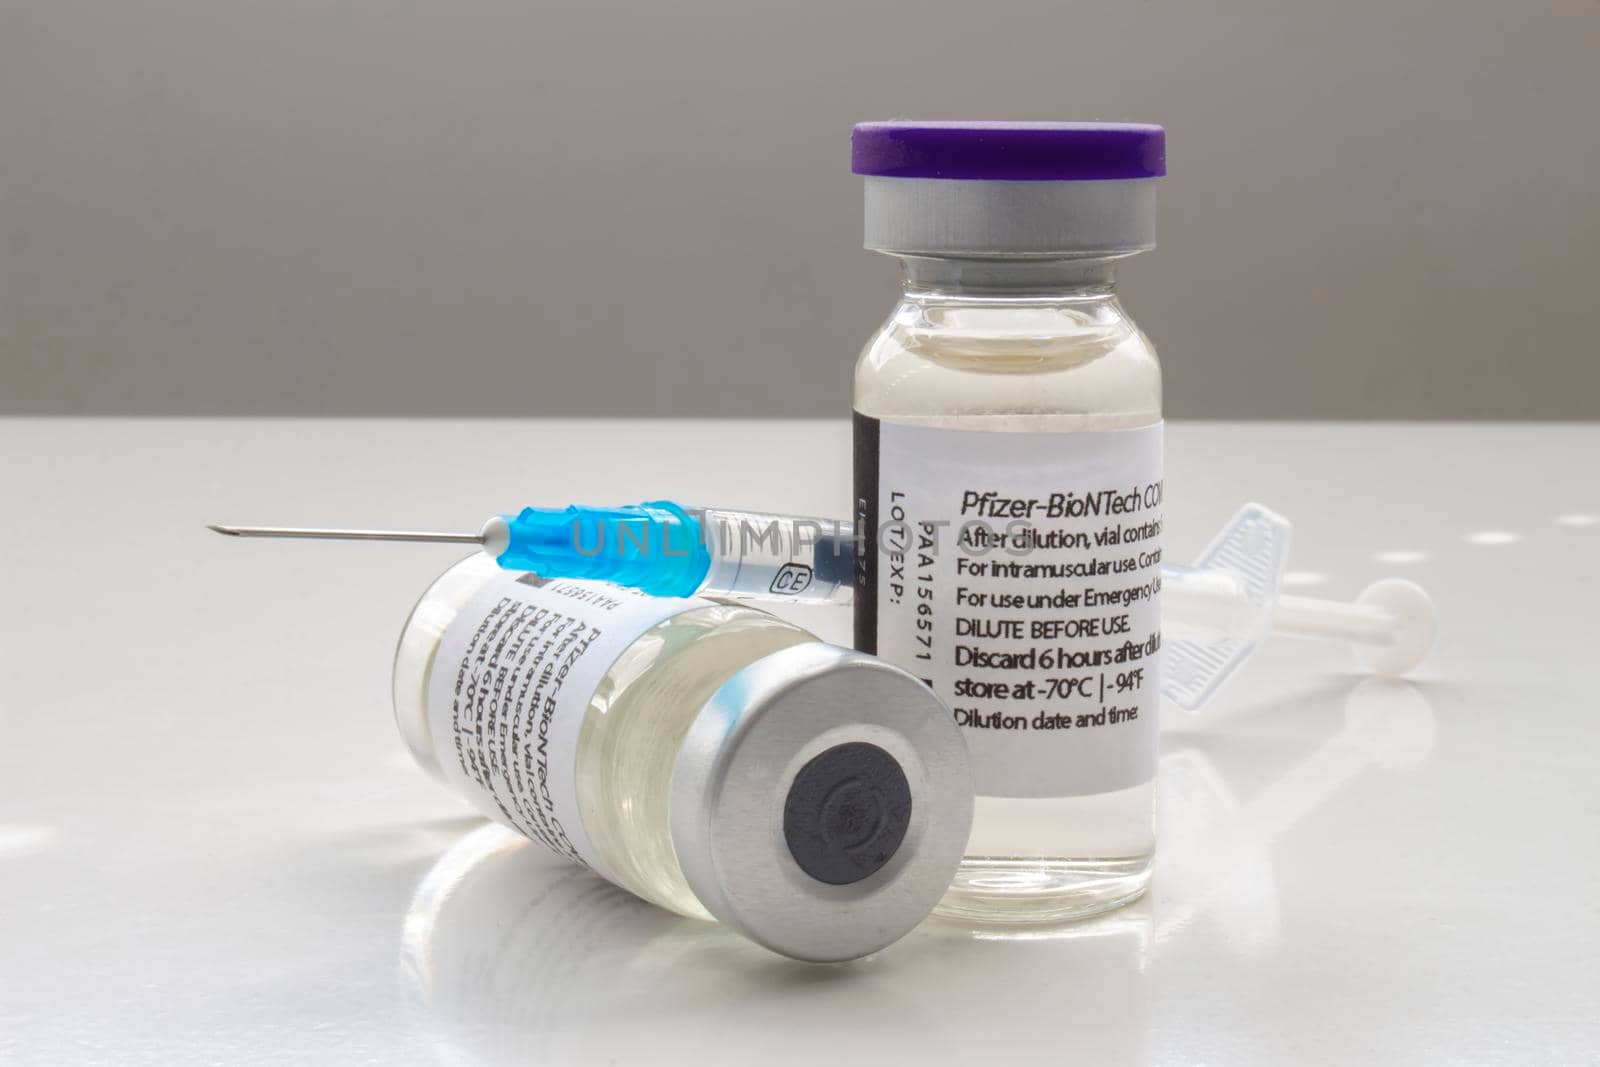 Calgary, Alberta. Canada. April 02, 2021. A couple of Pfizer Covid-19 vaccine vials with a syringe by oasisamuel